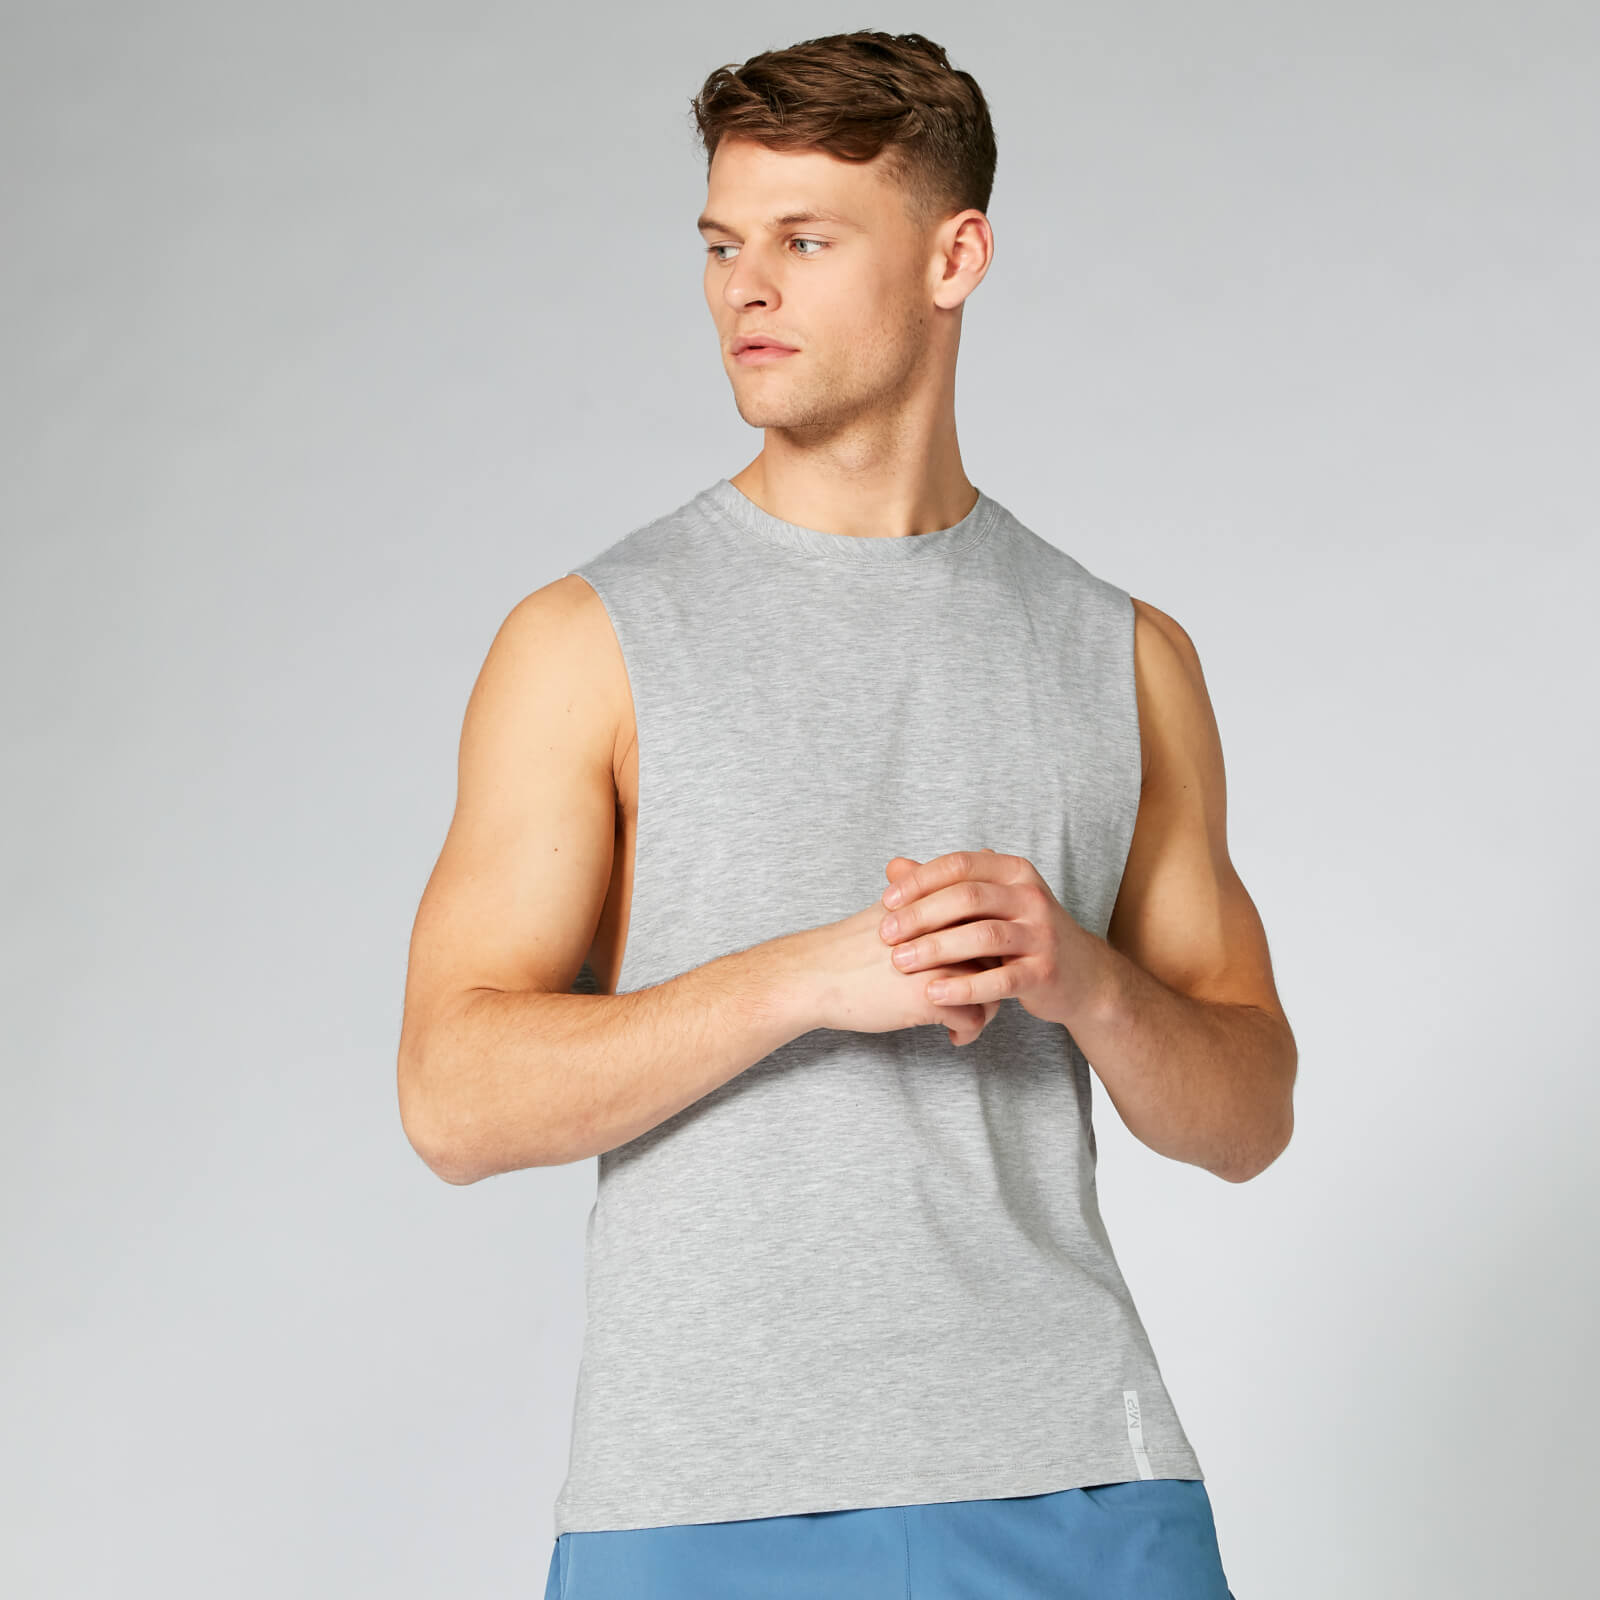 Myprotein Luxe Classic Drop Armhole Tank Top - Silver - M